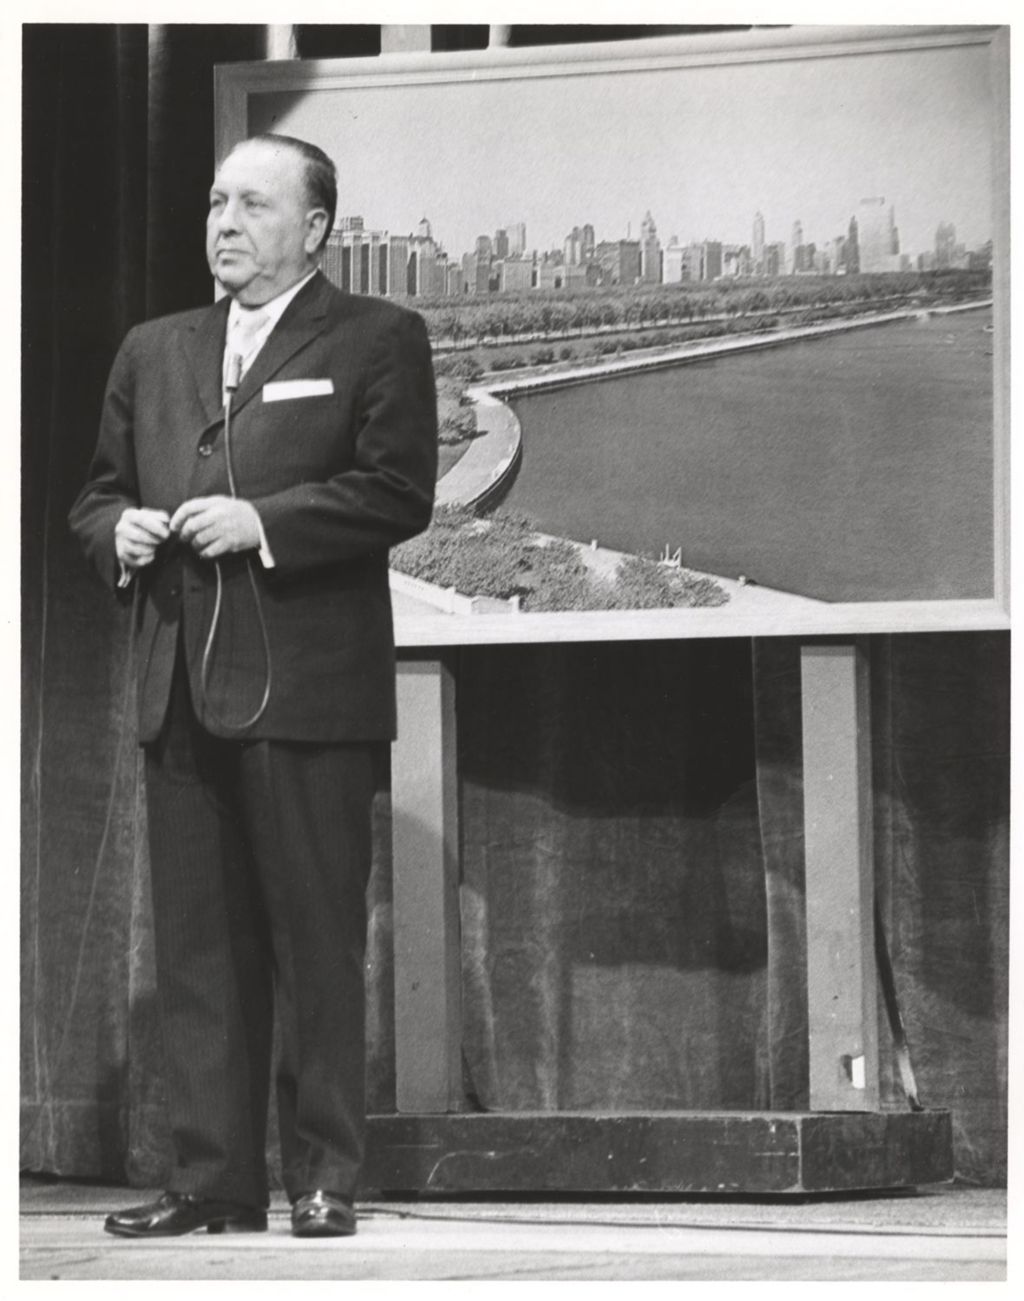 Richard J. Daley with a photo of the Chicago lakefront